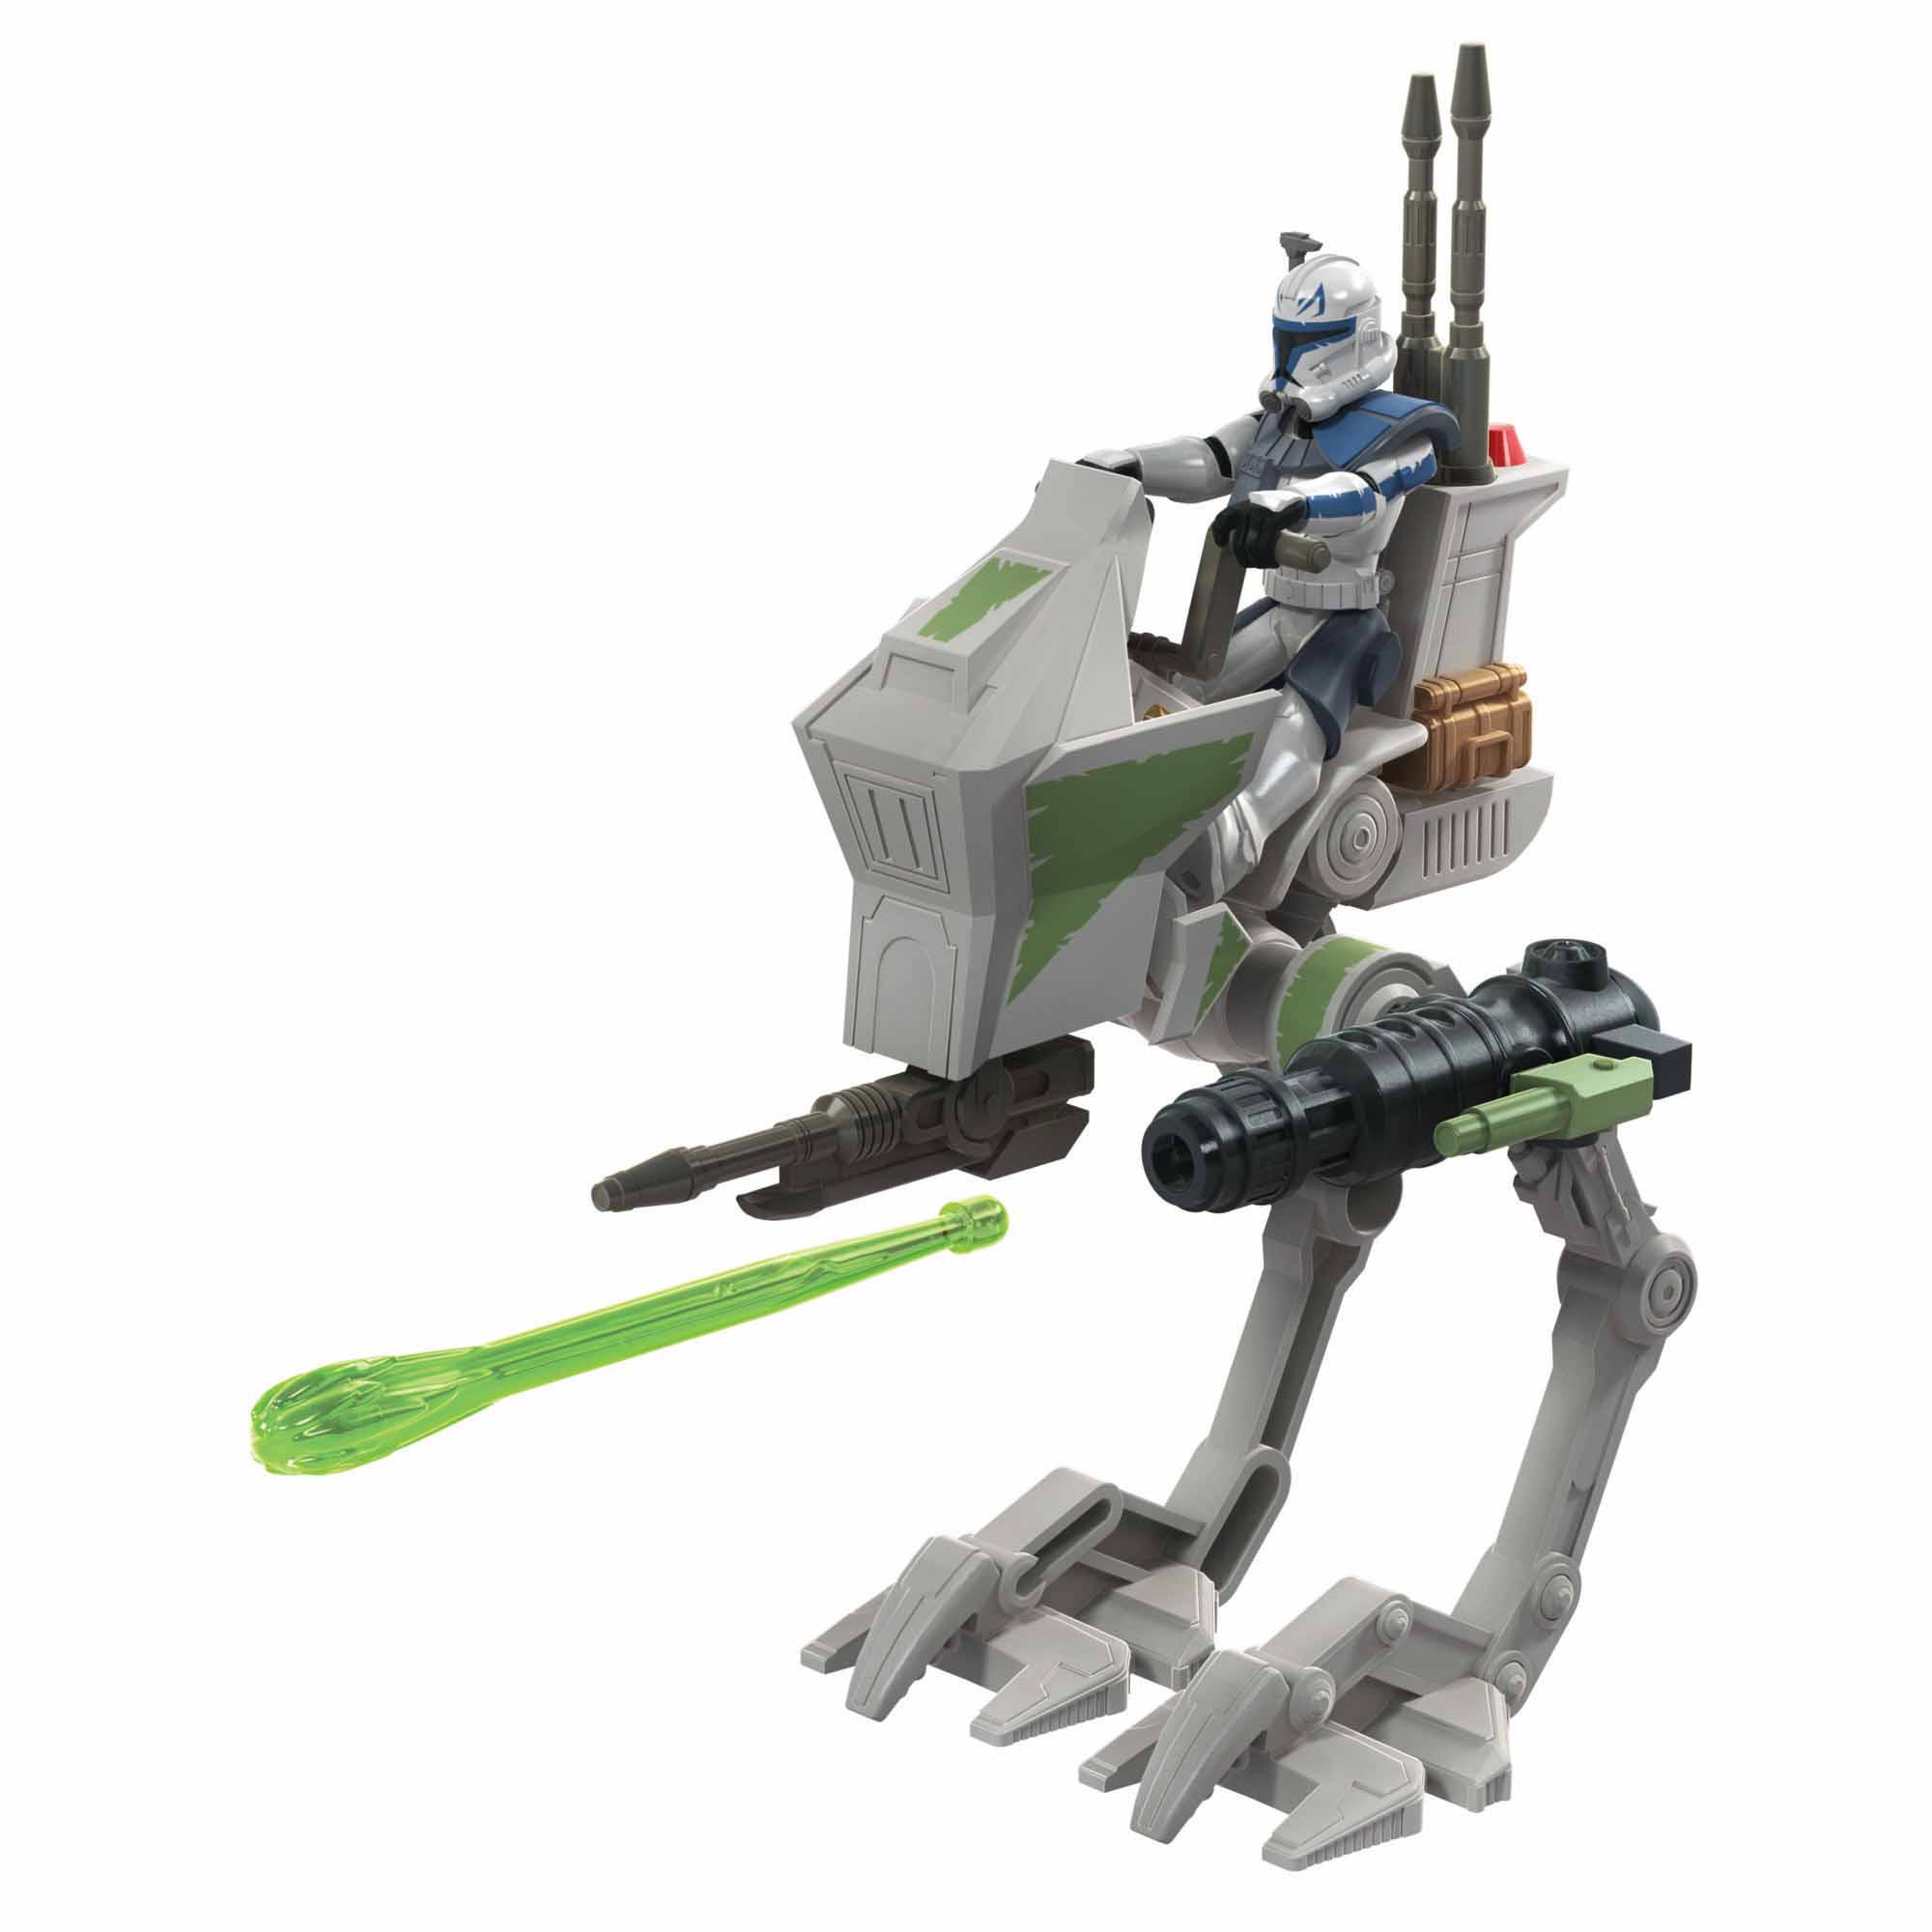 Star Wars Mission Fleet Expedition Class Captain Rex Clone Combat 2.5-Inch-Scale Figure and Vehicle, Kids Ages 4 and Up